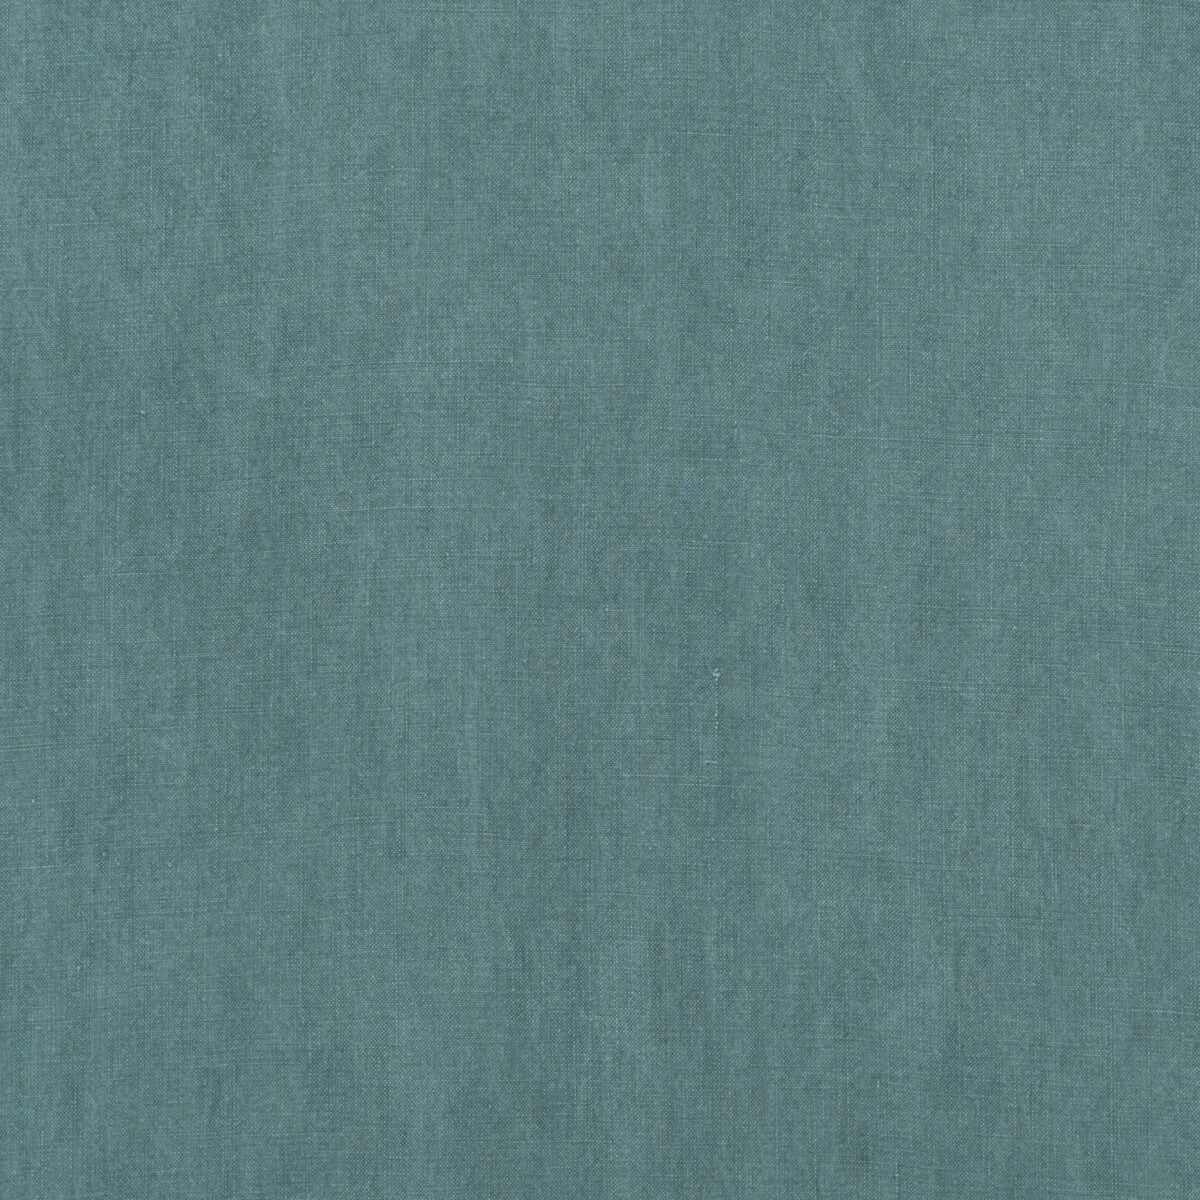 Sackville fabric in aqua color - pattern BF10547.725.0 - by G P &amp; J Baker in the Langdale collection